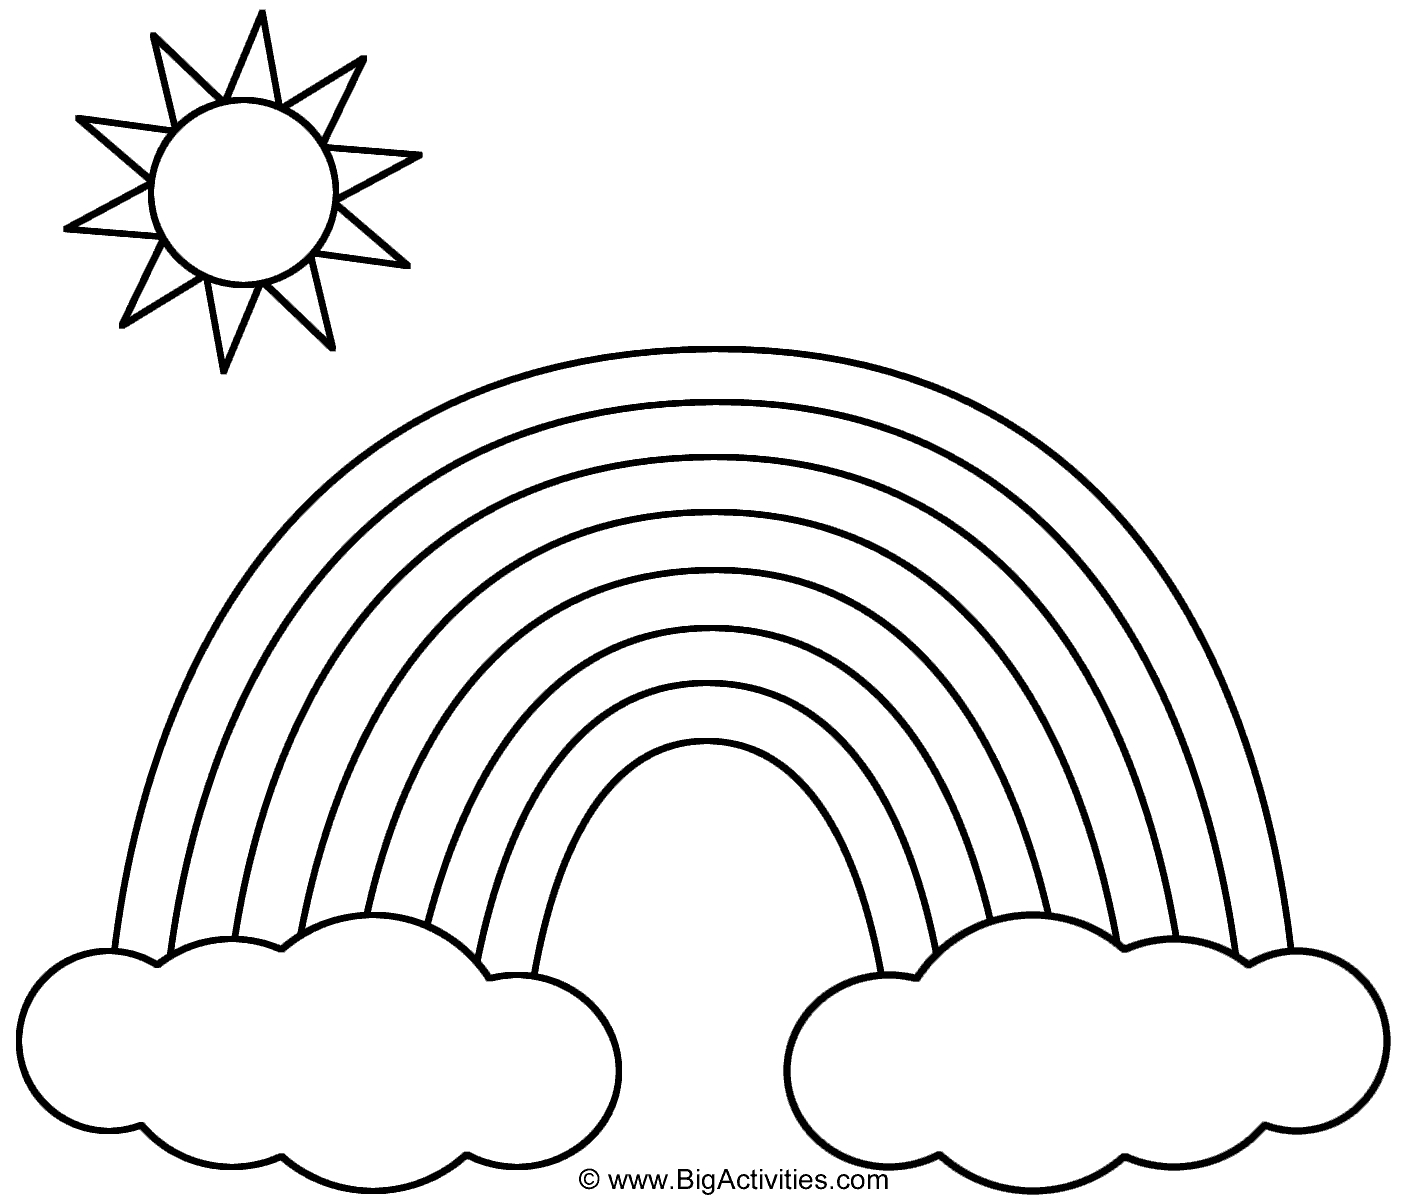 Coloring Pages Sun Rainbow With Clouds And Sun Coloring Page Nature